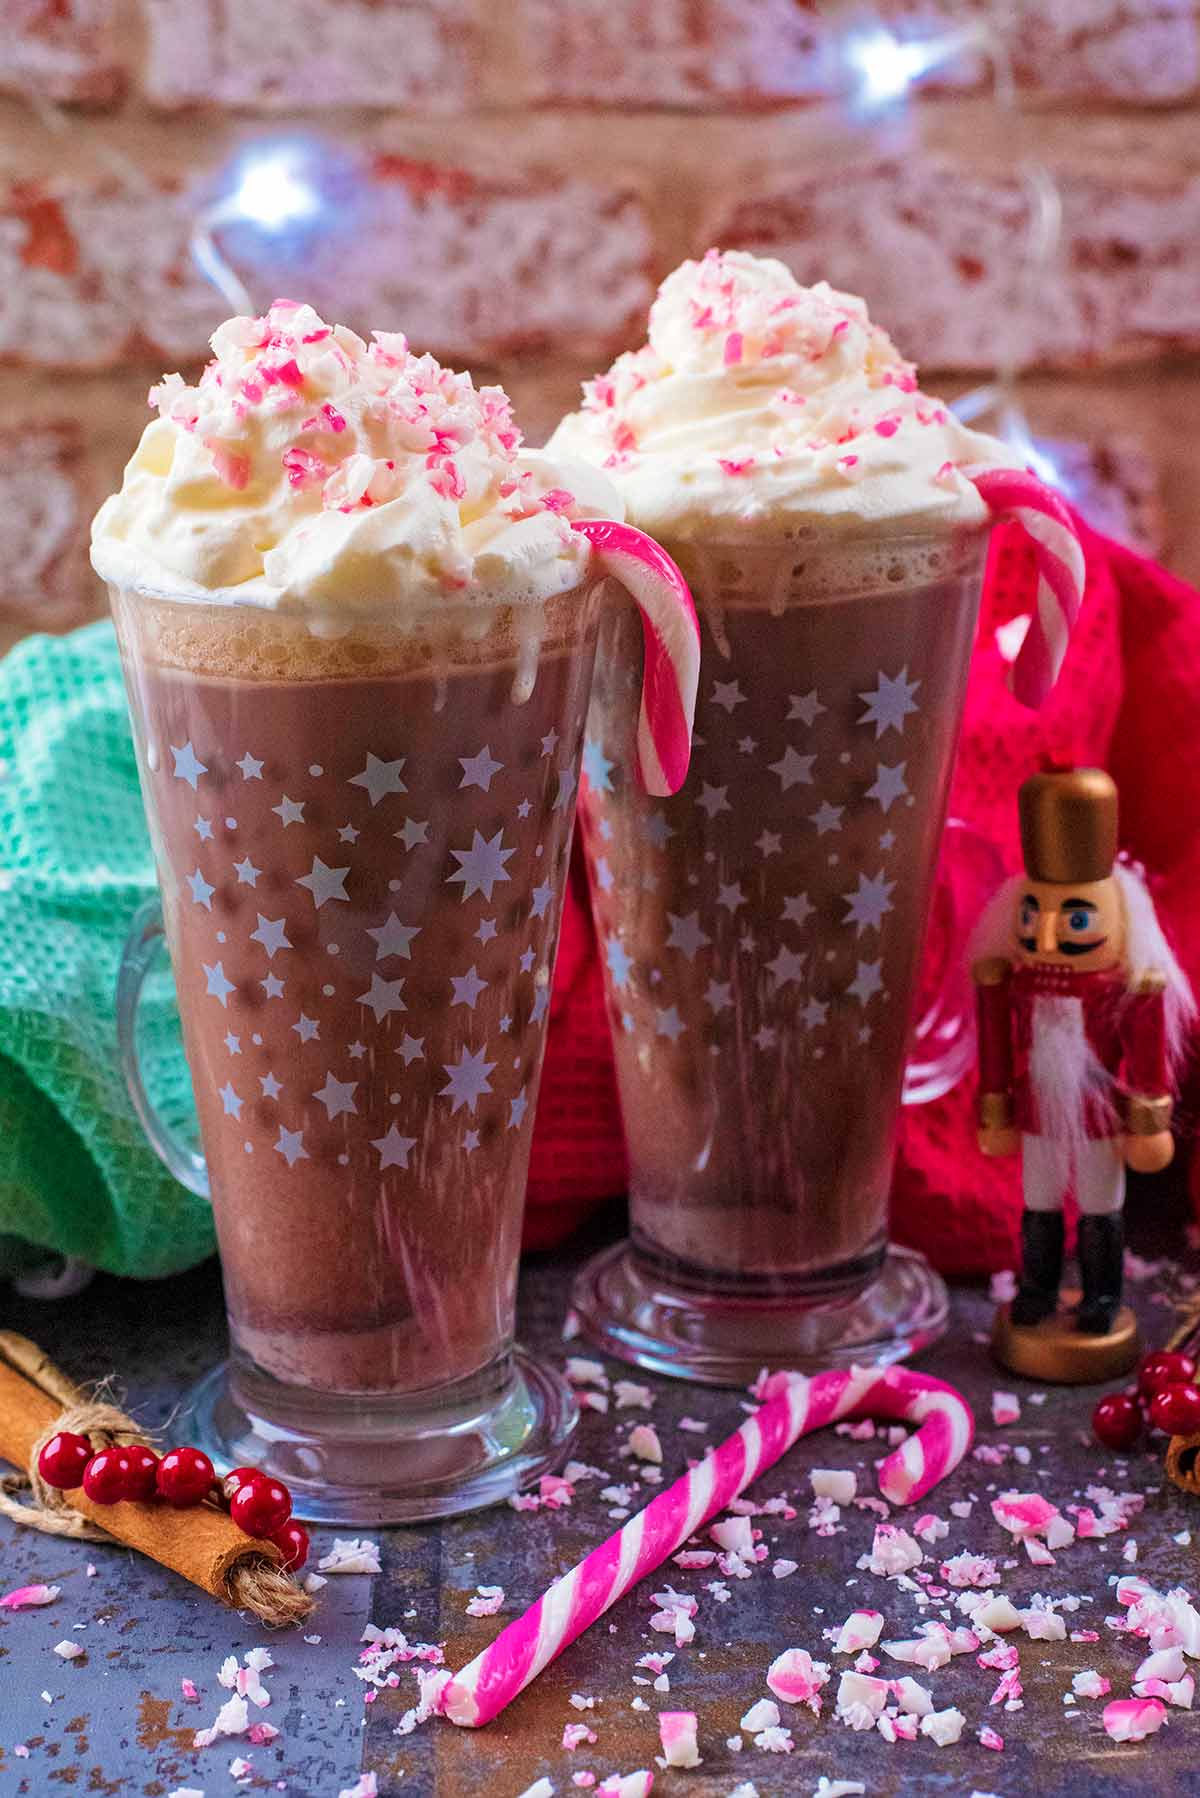 Two tall glasses of hot chocolate topped with cream and candy canes.